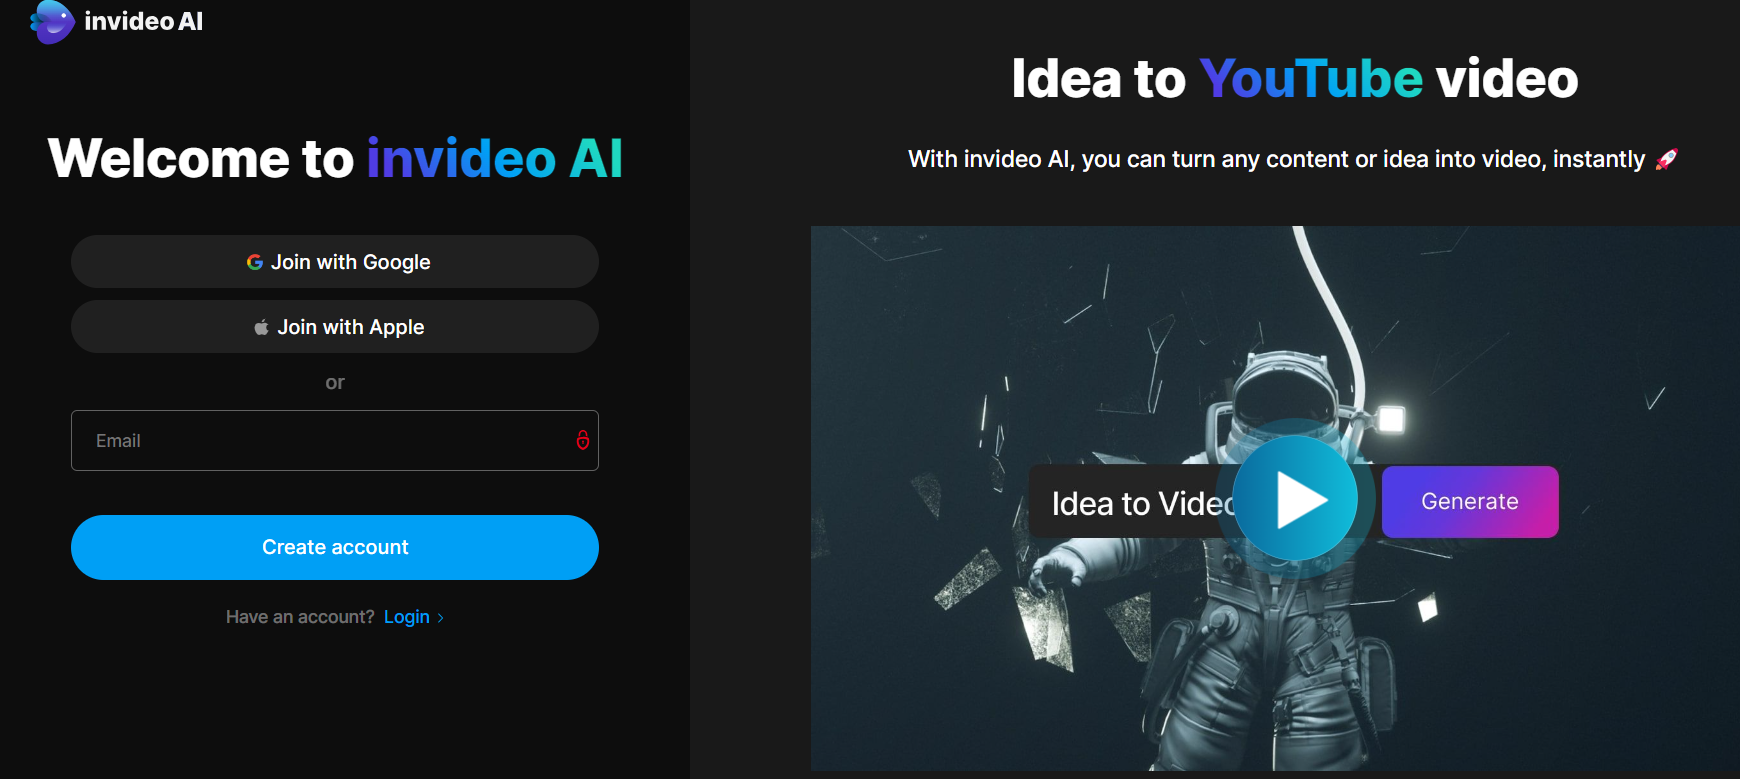 Turn any content into video with Invideo AI